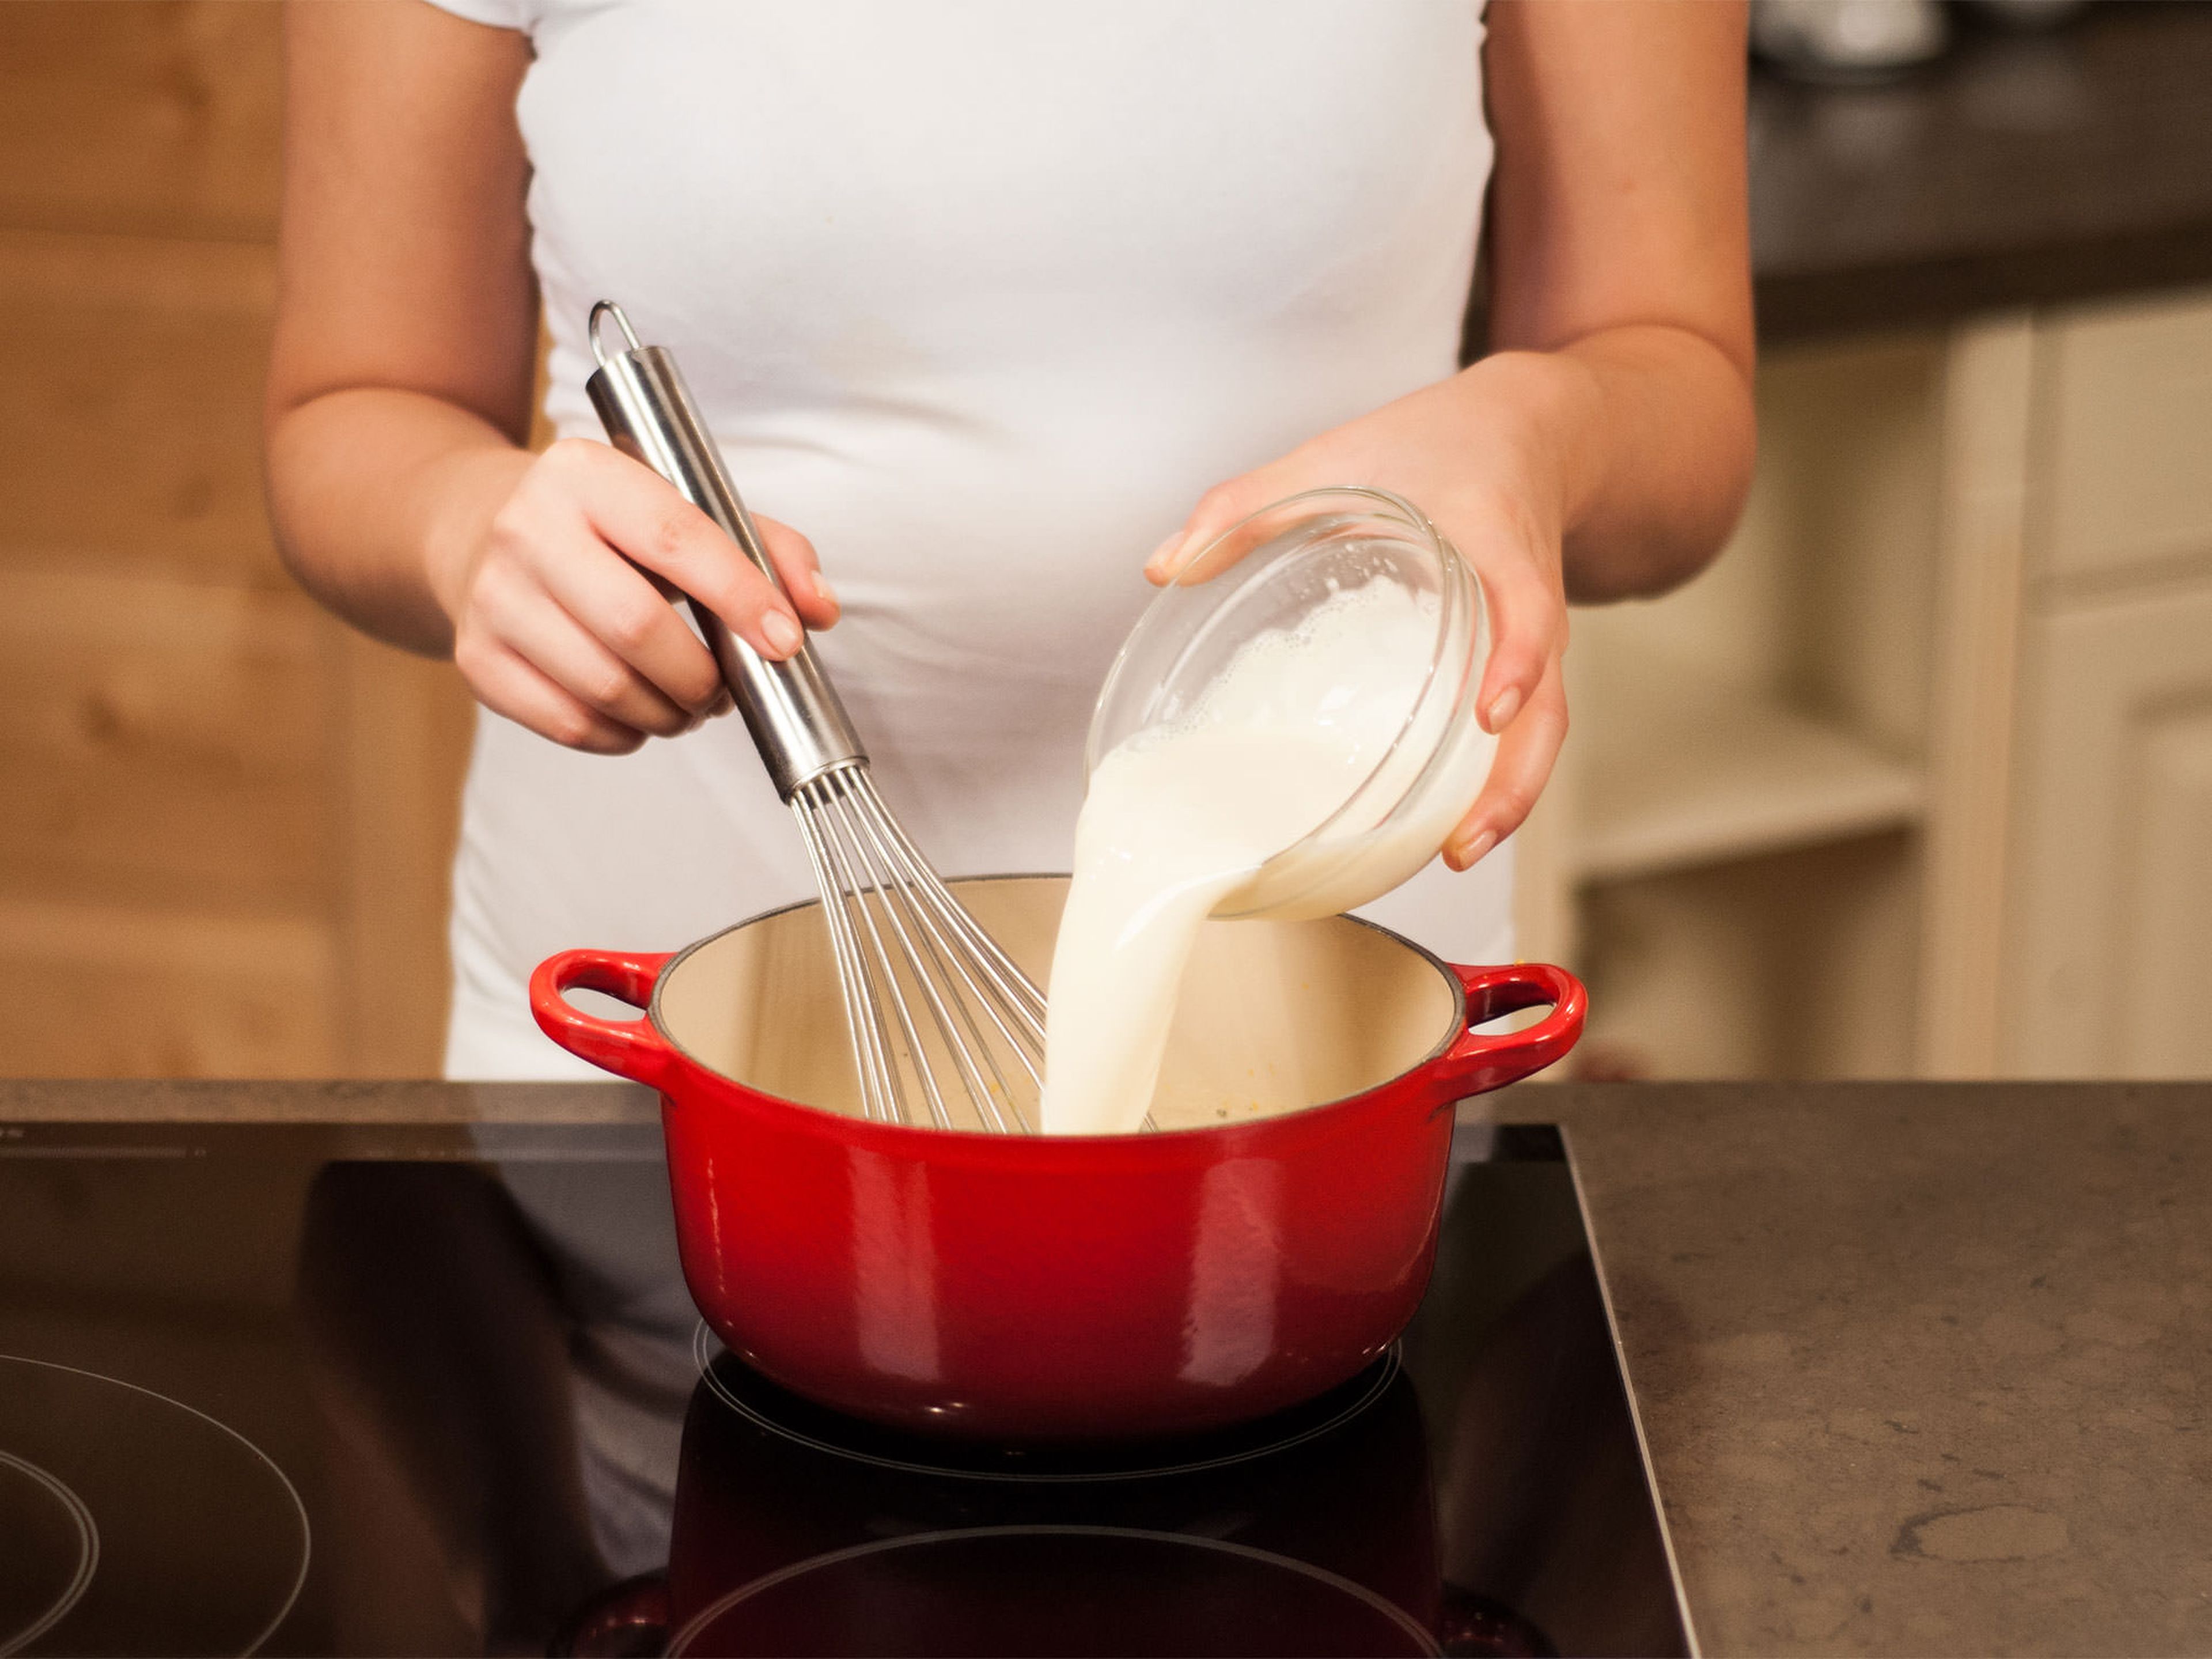 Whisk in dissolved starch into the soy milk mixture. Return to a boil while stirring constantly. Transfer to small serving dishes and allow to cool.